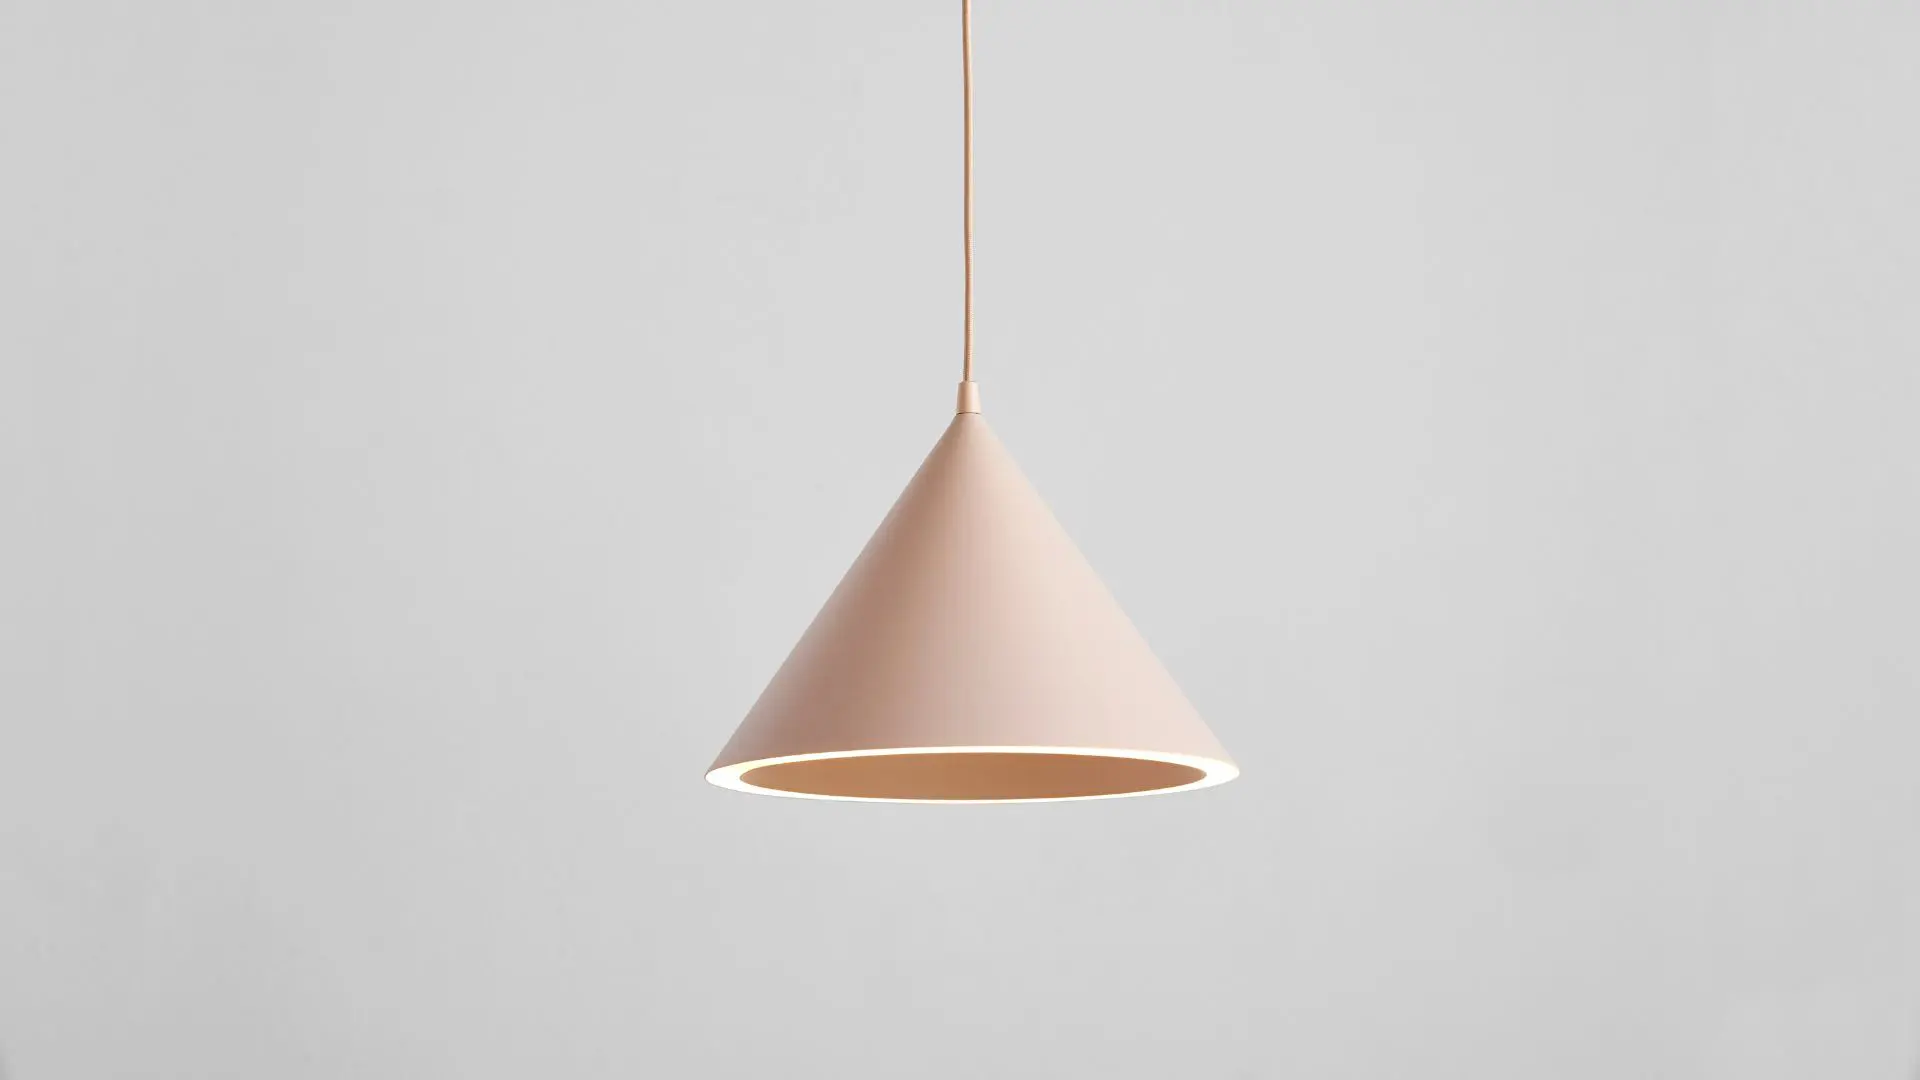 Annular lamp by MSDS studio for Woud - cover